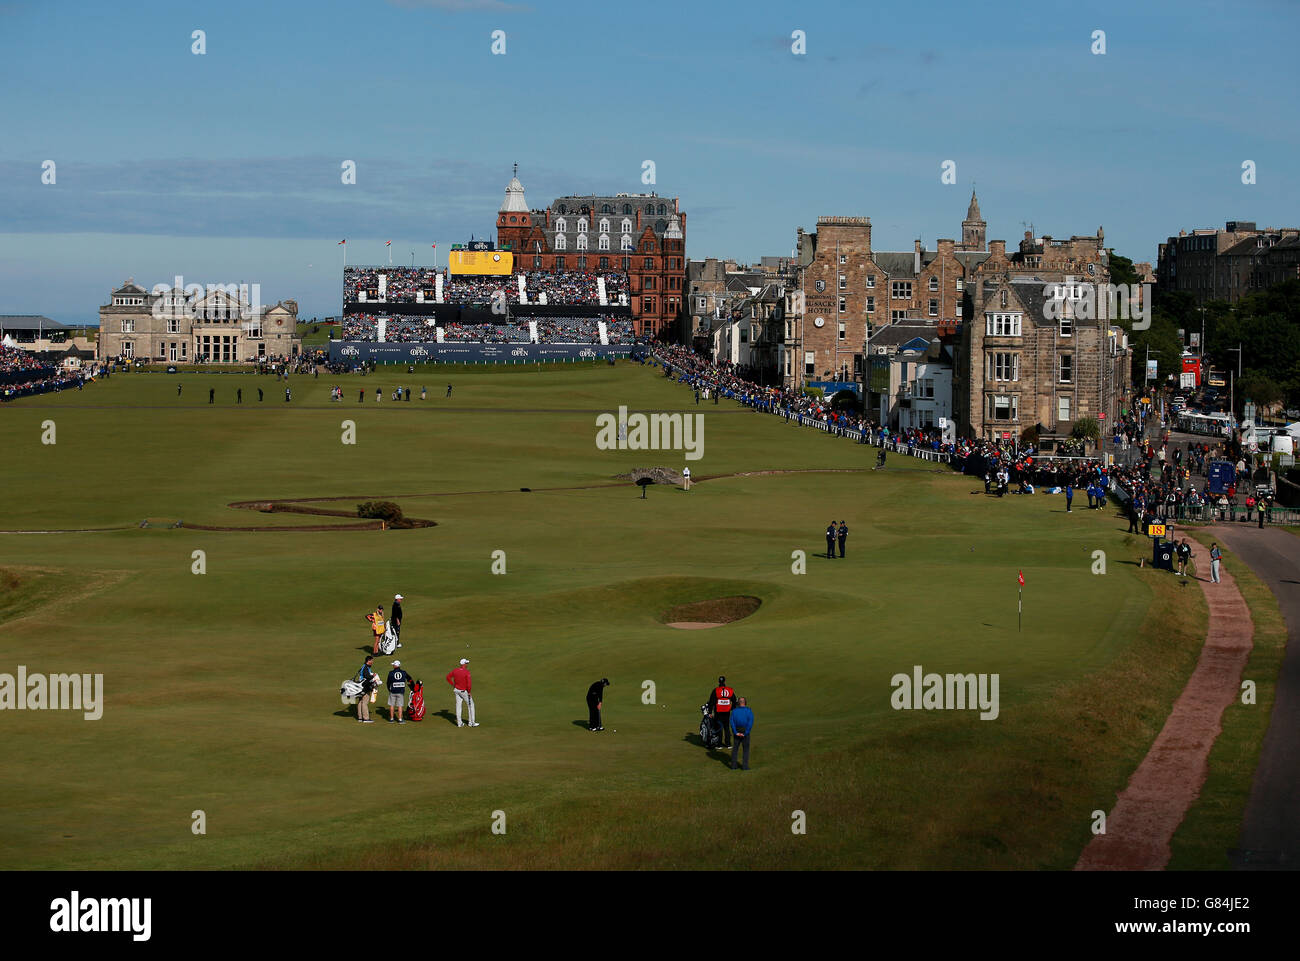 South Africa's Gary Player putts on the 17th green during the Champions Challenge at St Andrews, Fife. Stock Photo